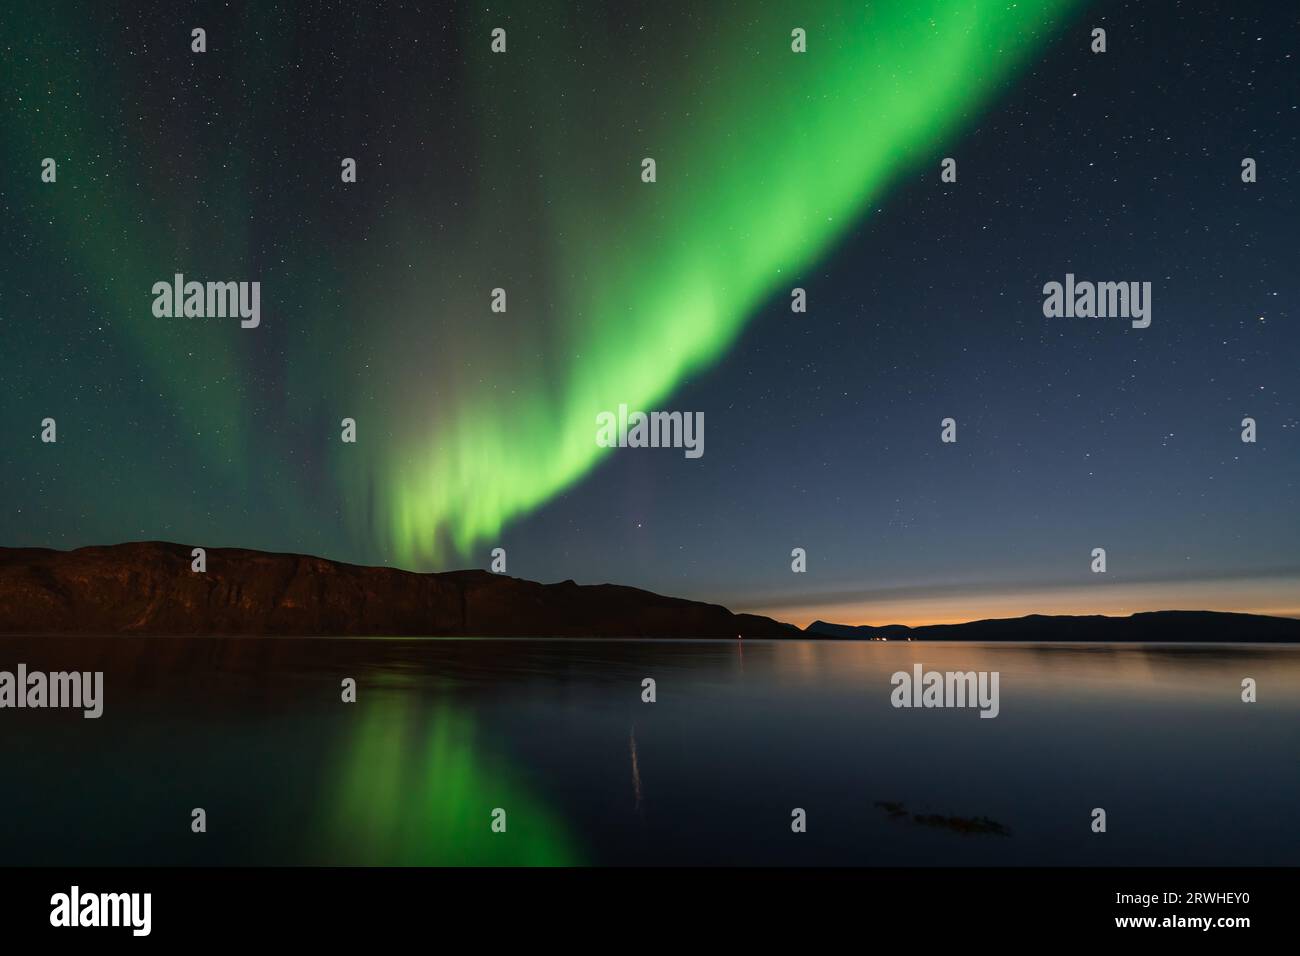 Northern Lights also known as Aurora Borealis over Scandinavia in Northern Norway Stock Photo